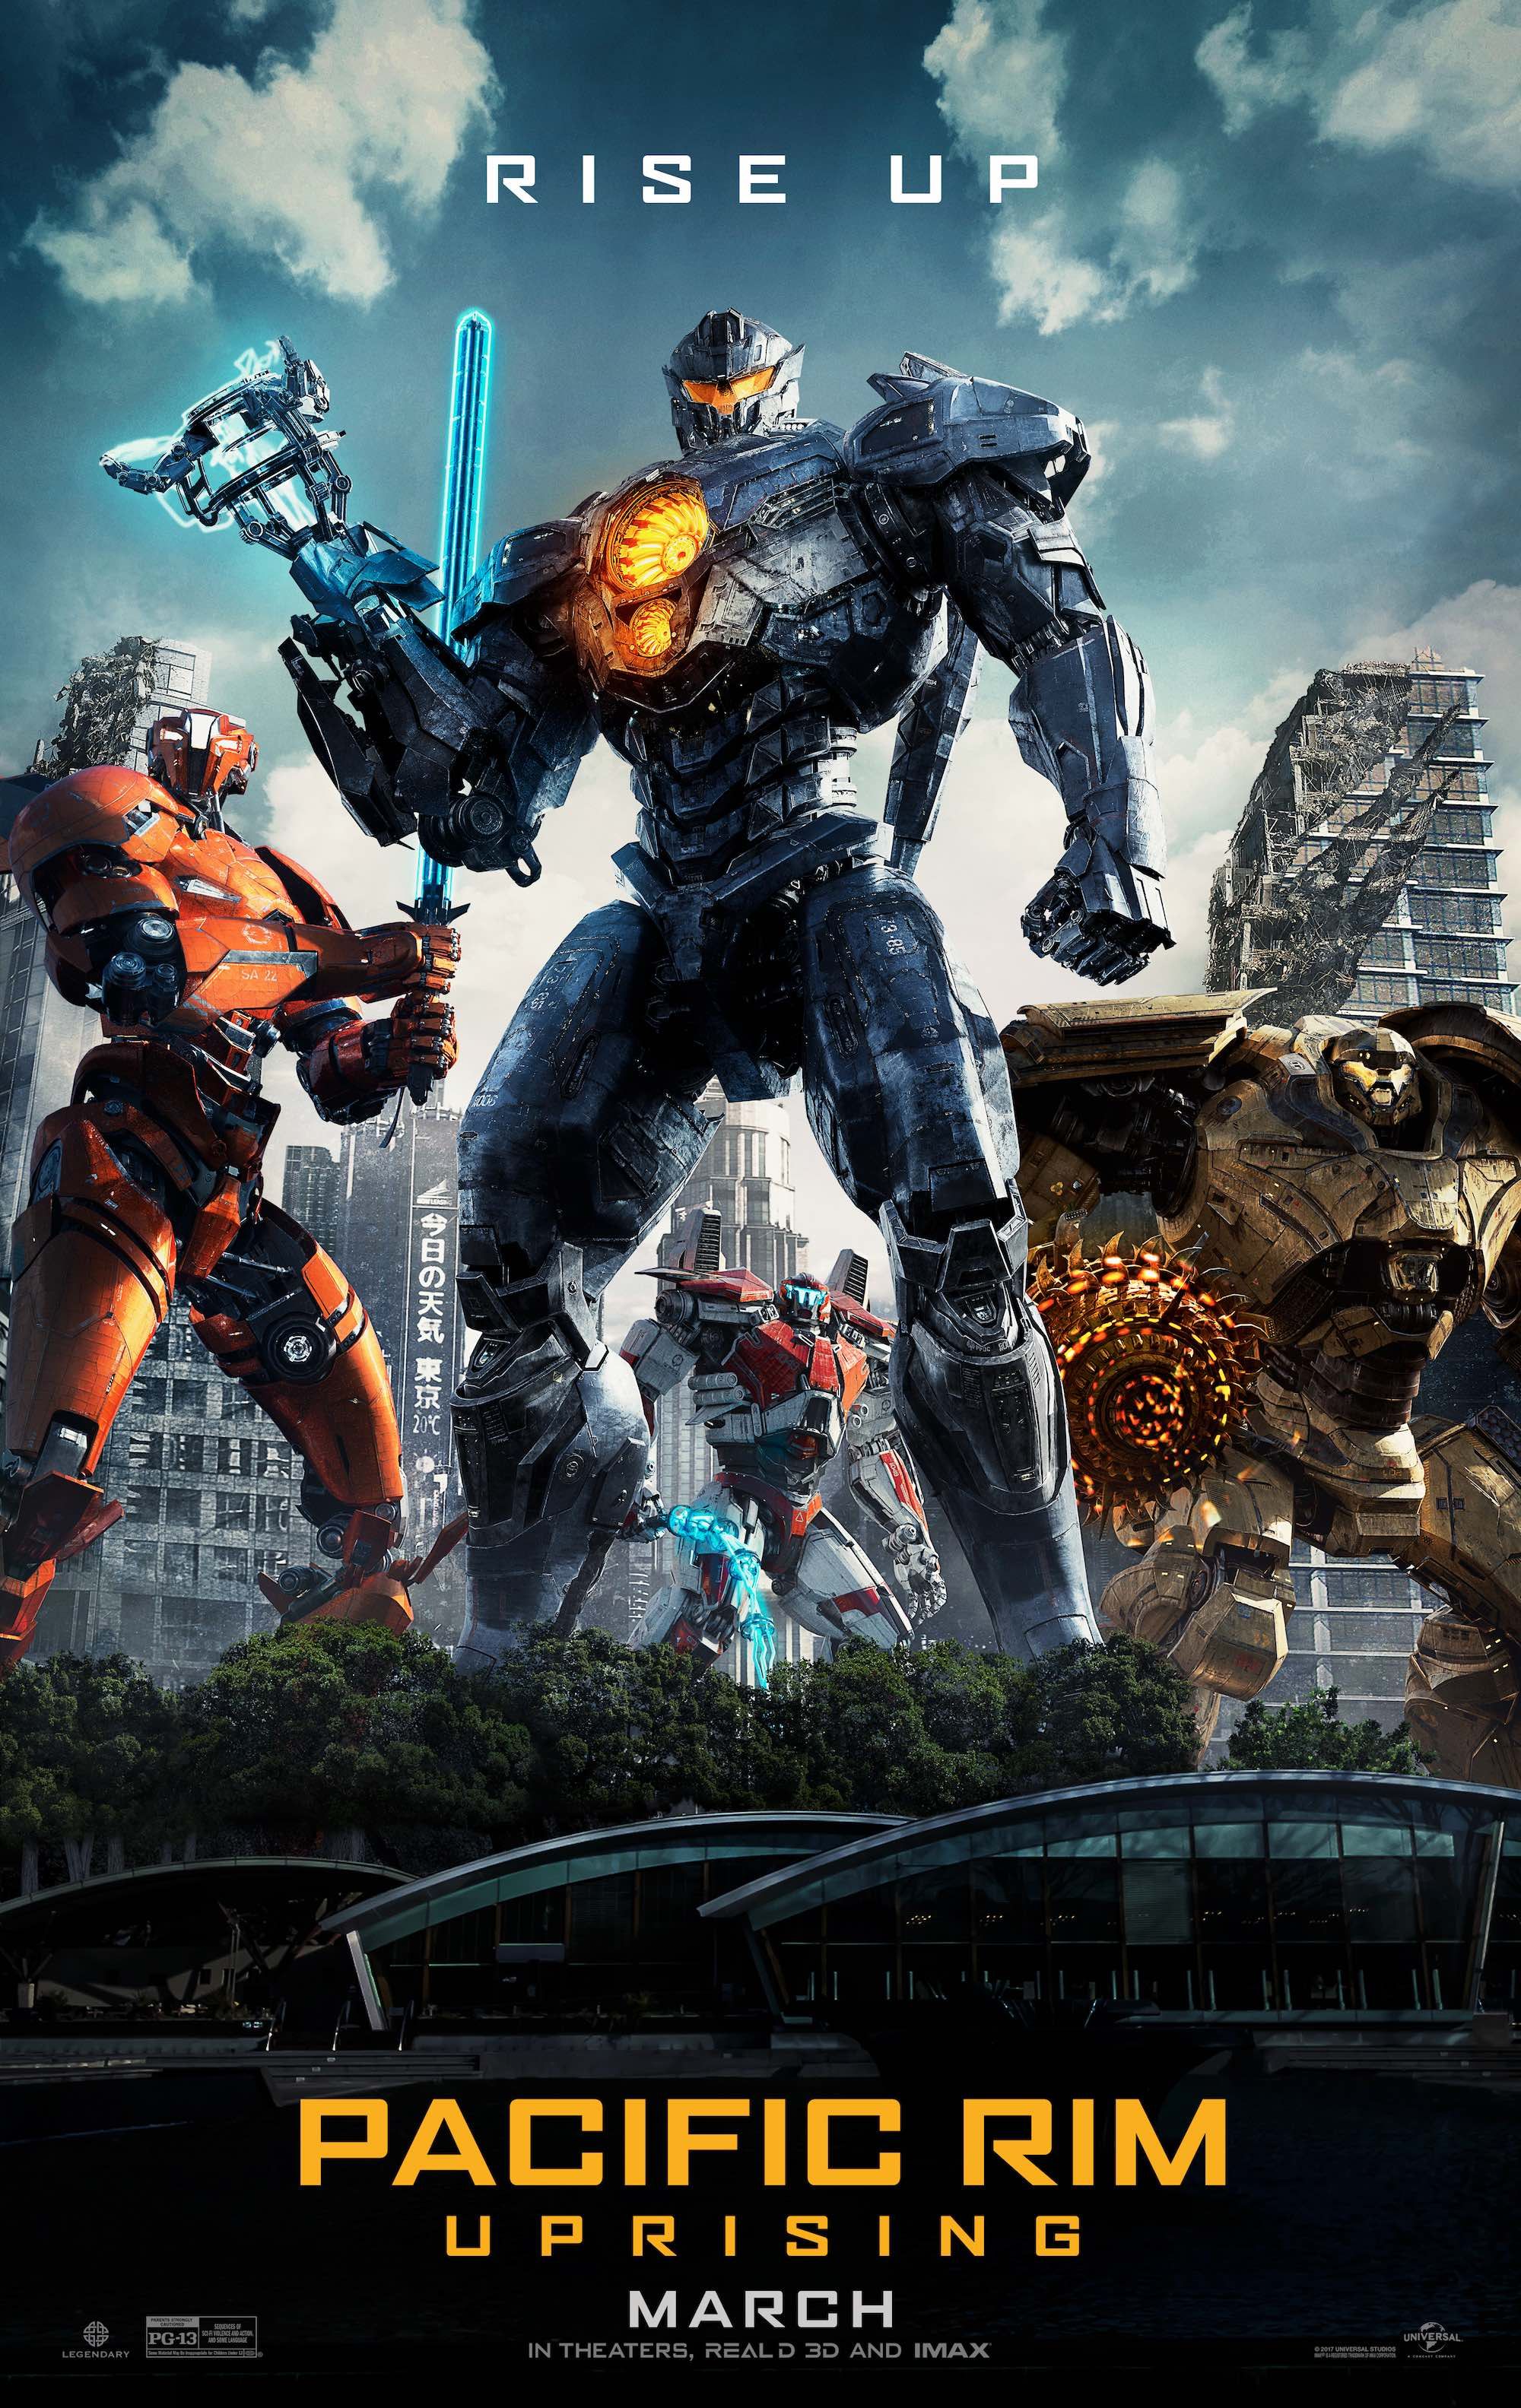 Pacific Rim 2: First Look Images & Details Spotlight the New Jaegers